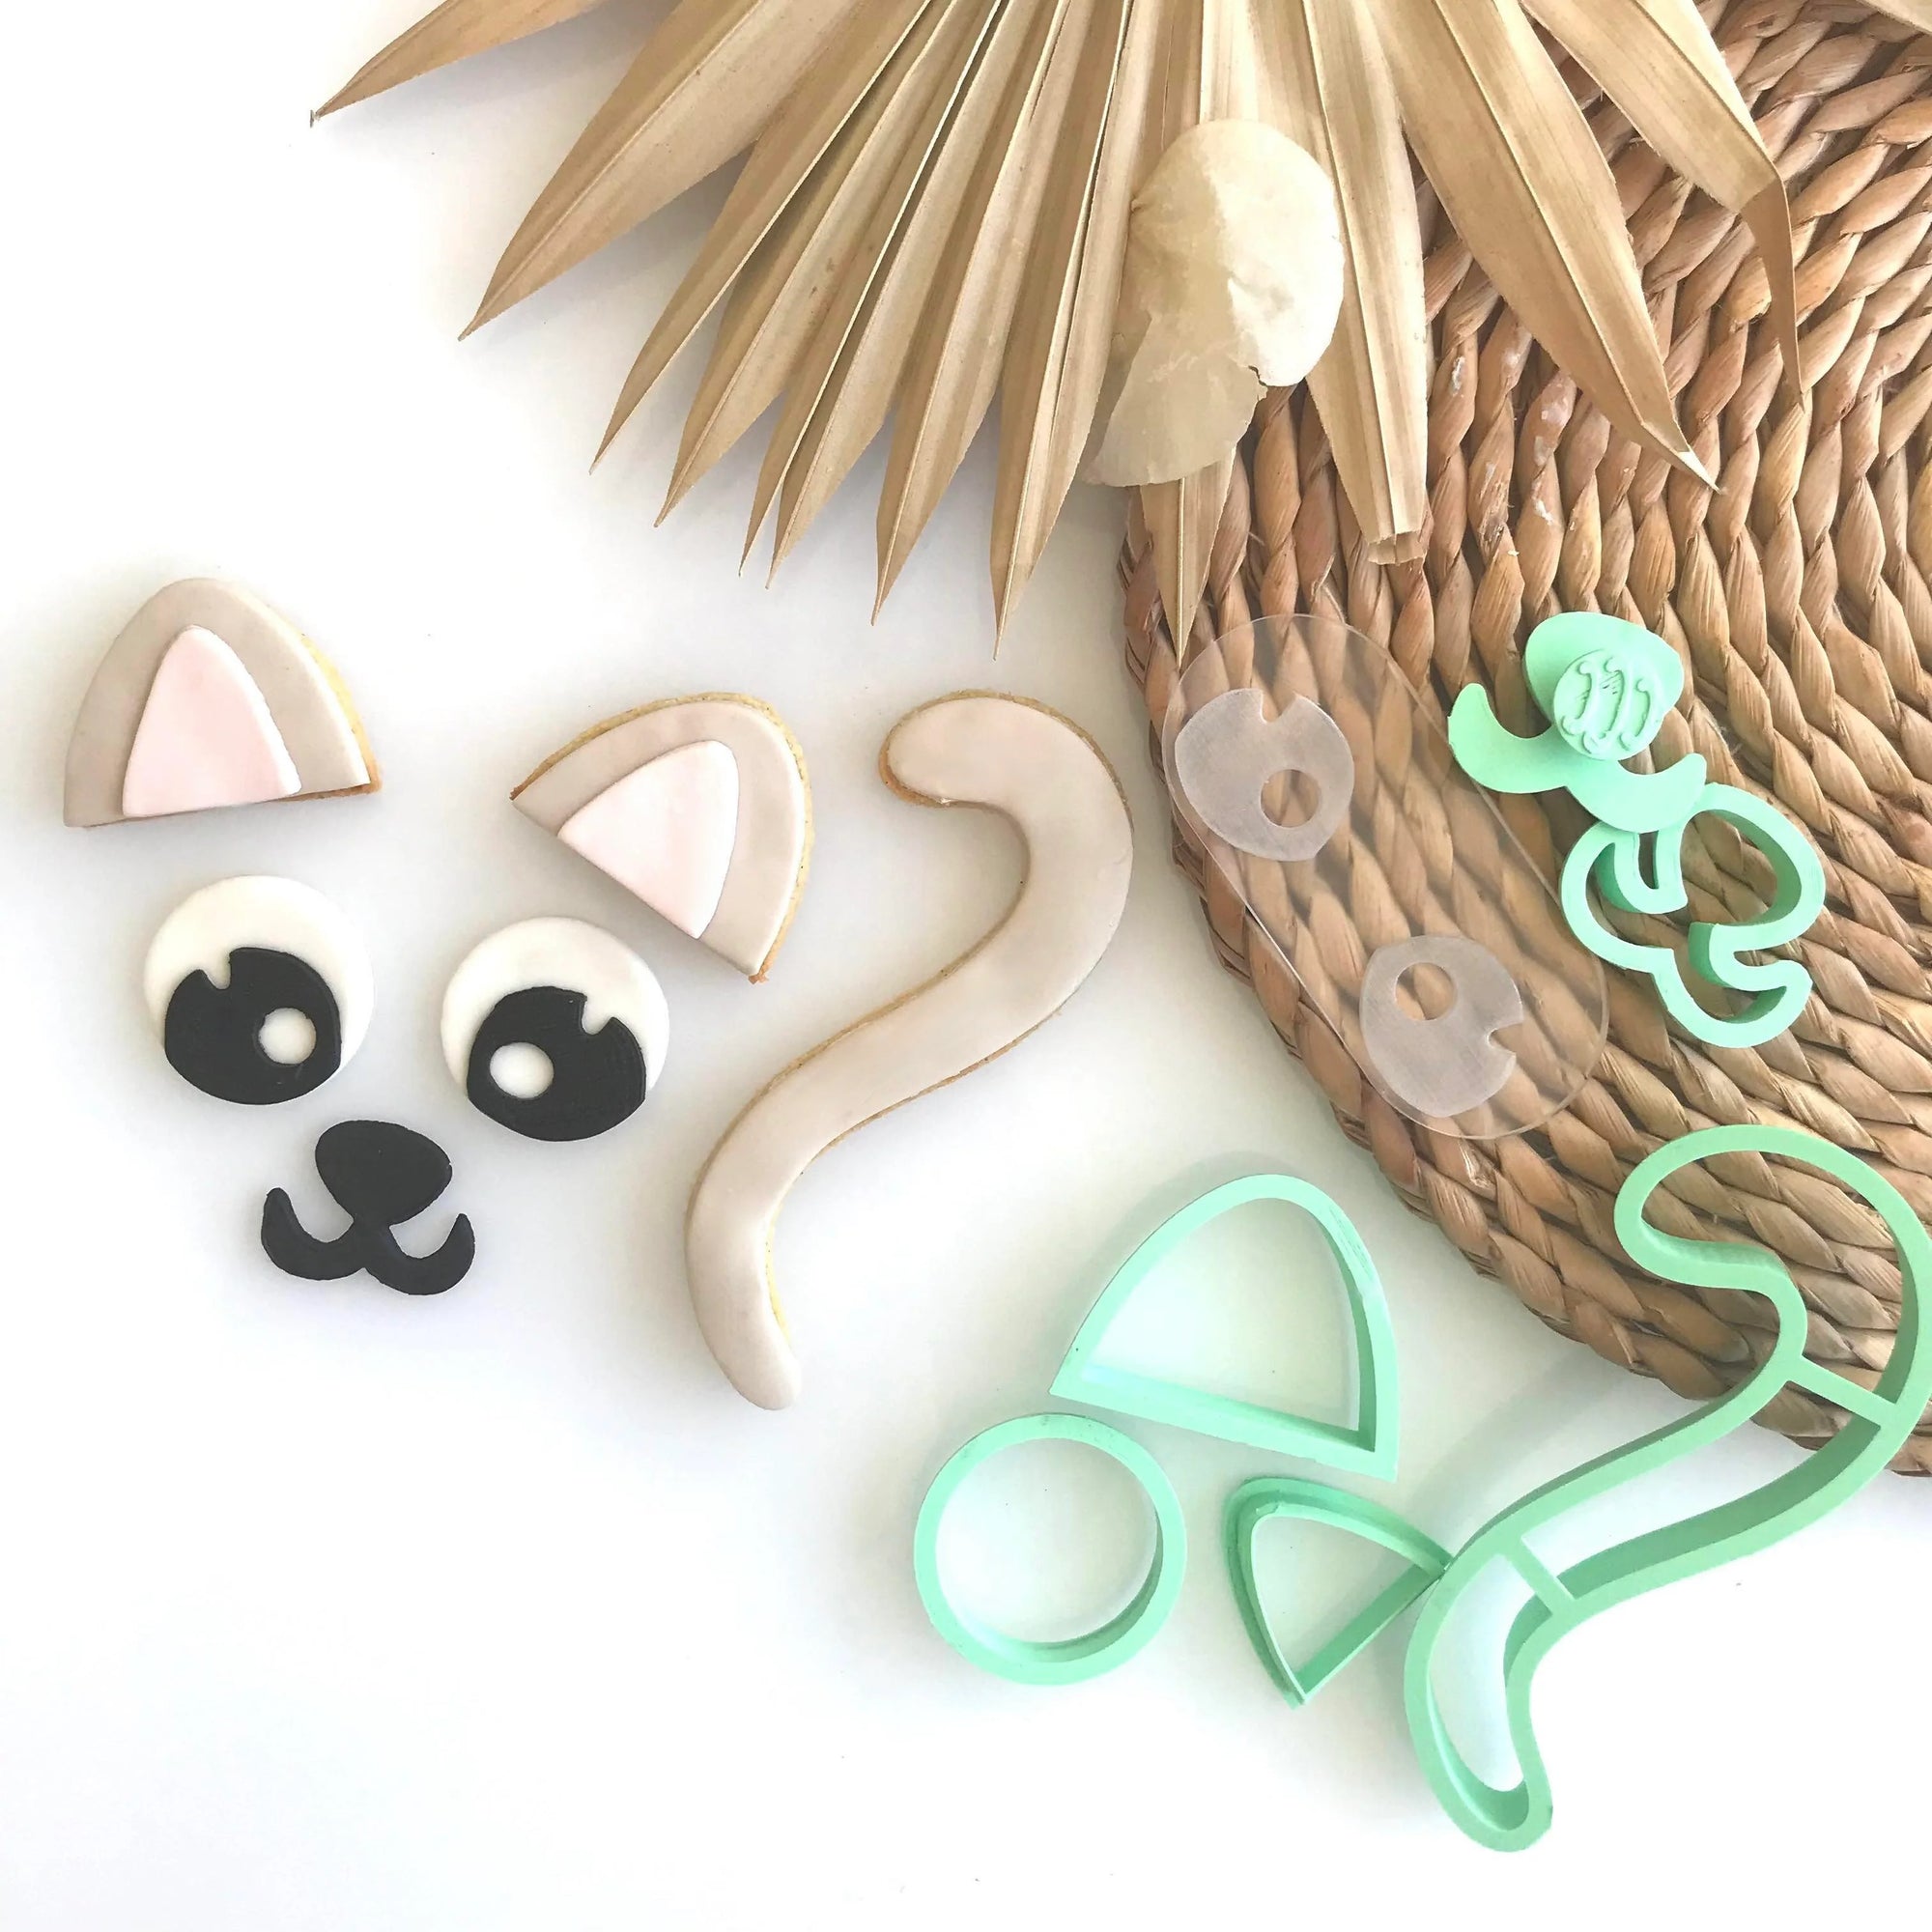 Cat Cake Cutter Set by SweetP Cakes and Cookies